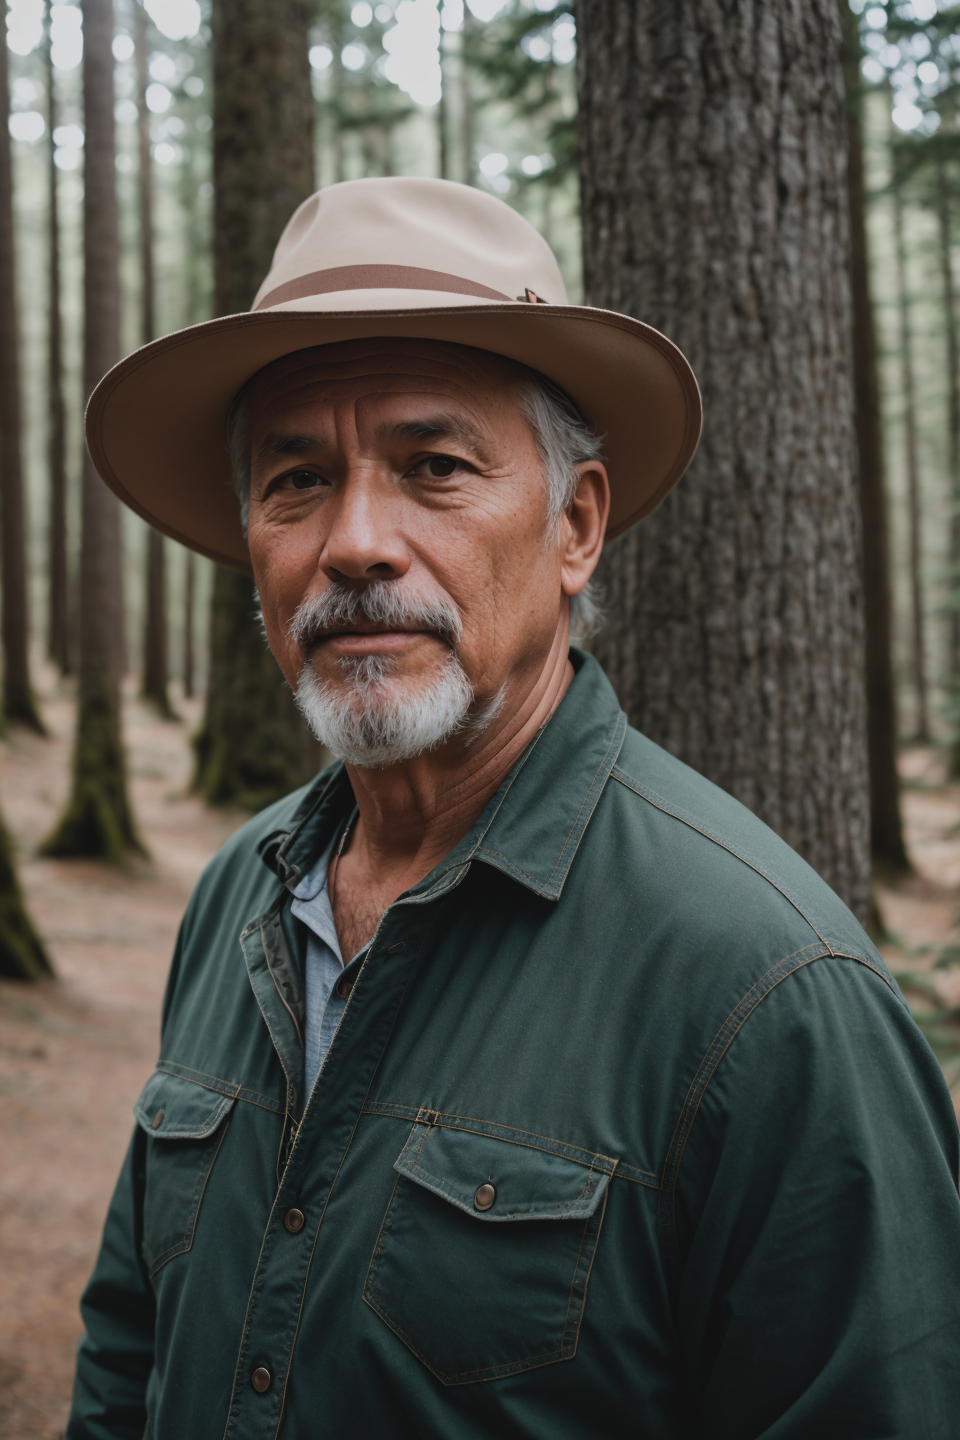 RAW photo, a portrait photo of 55 y.o man, traveler clothes, standing in the forest, natural skin, 8k uhd, high quality, f...